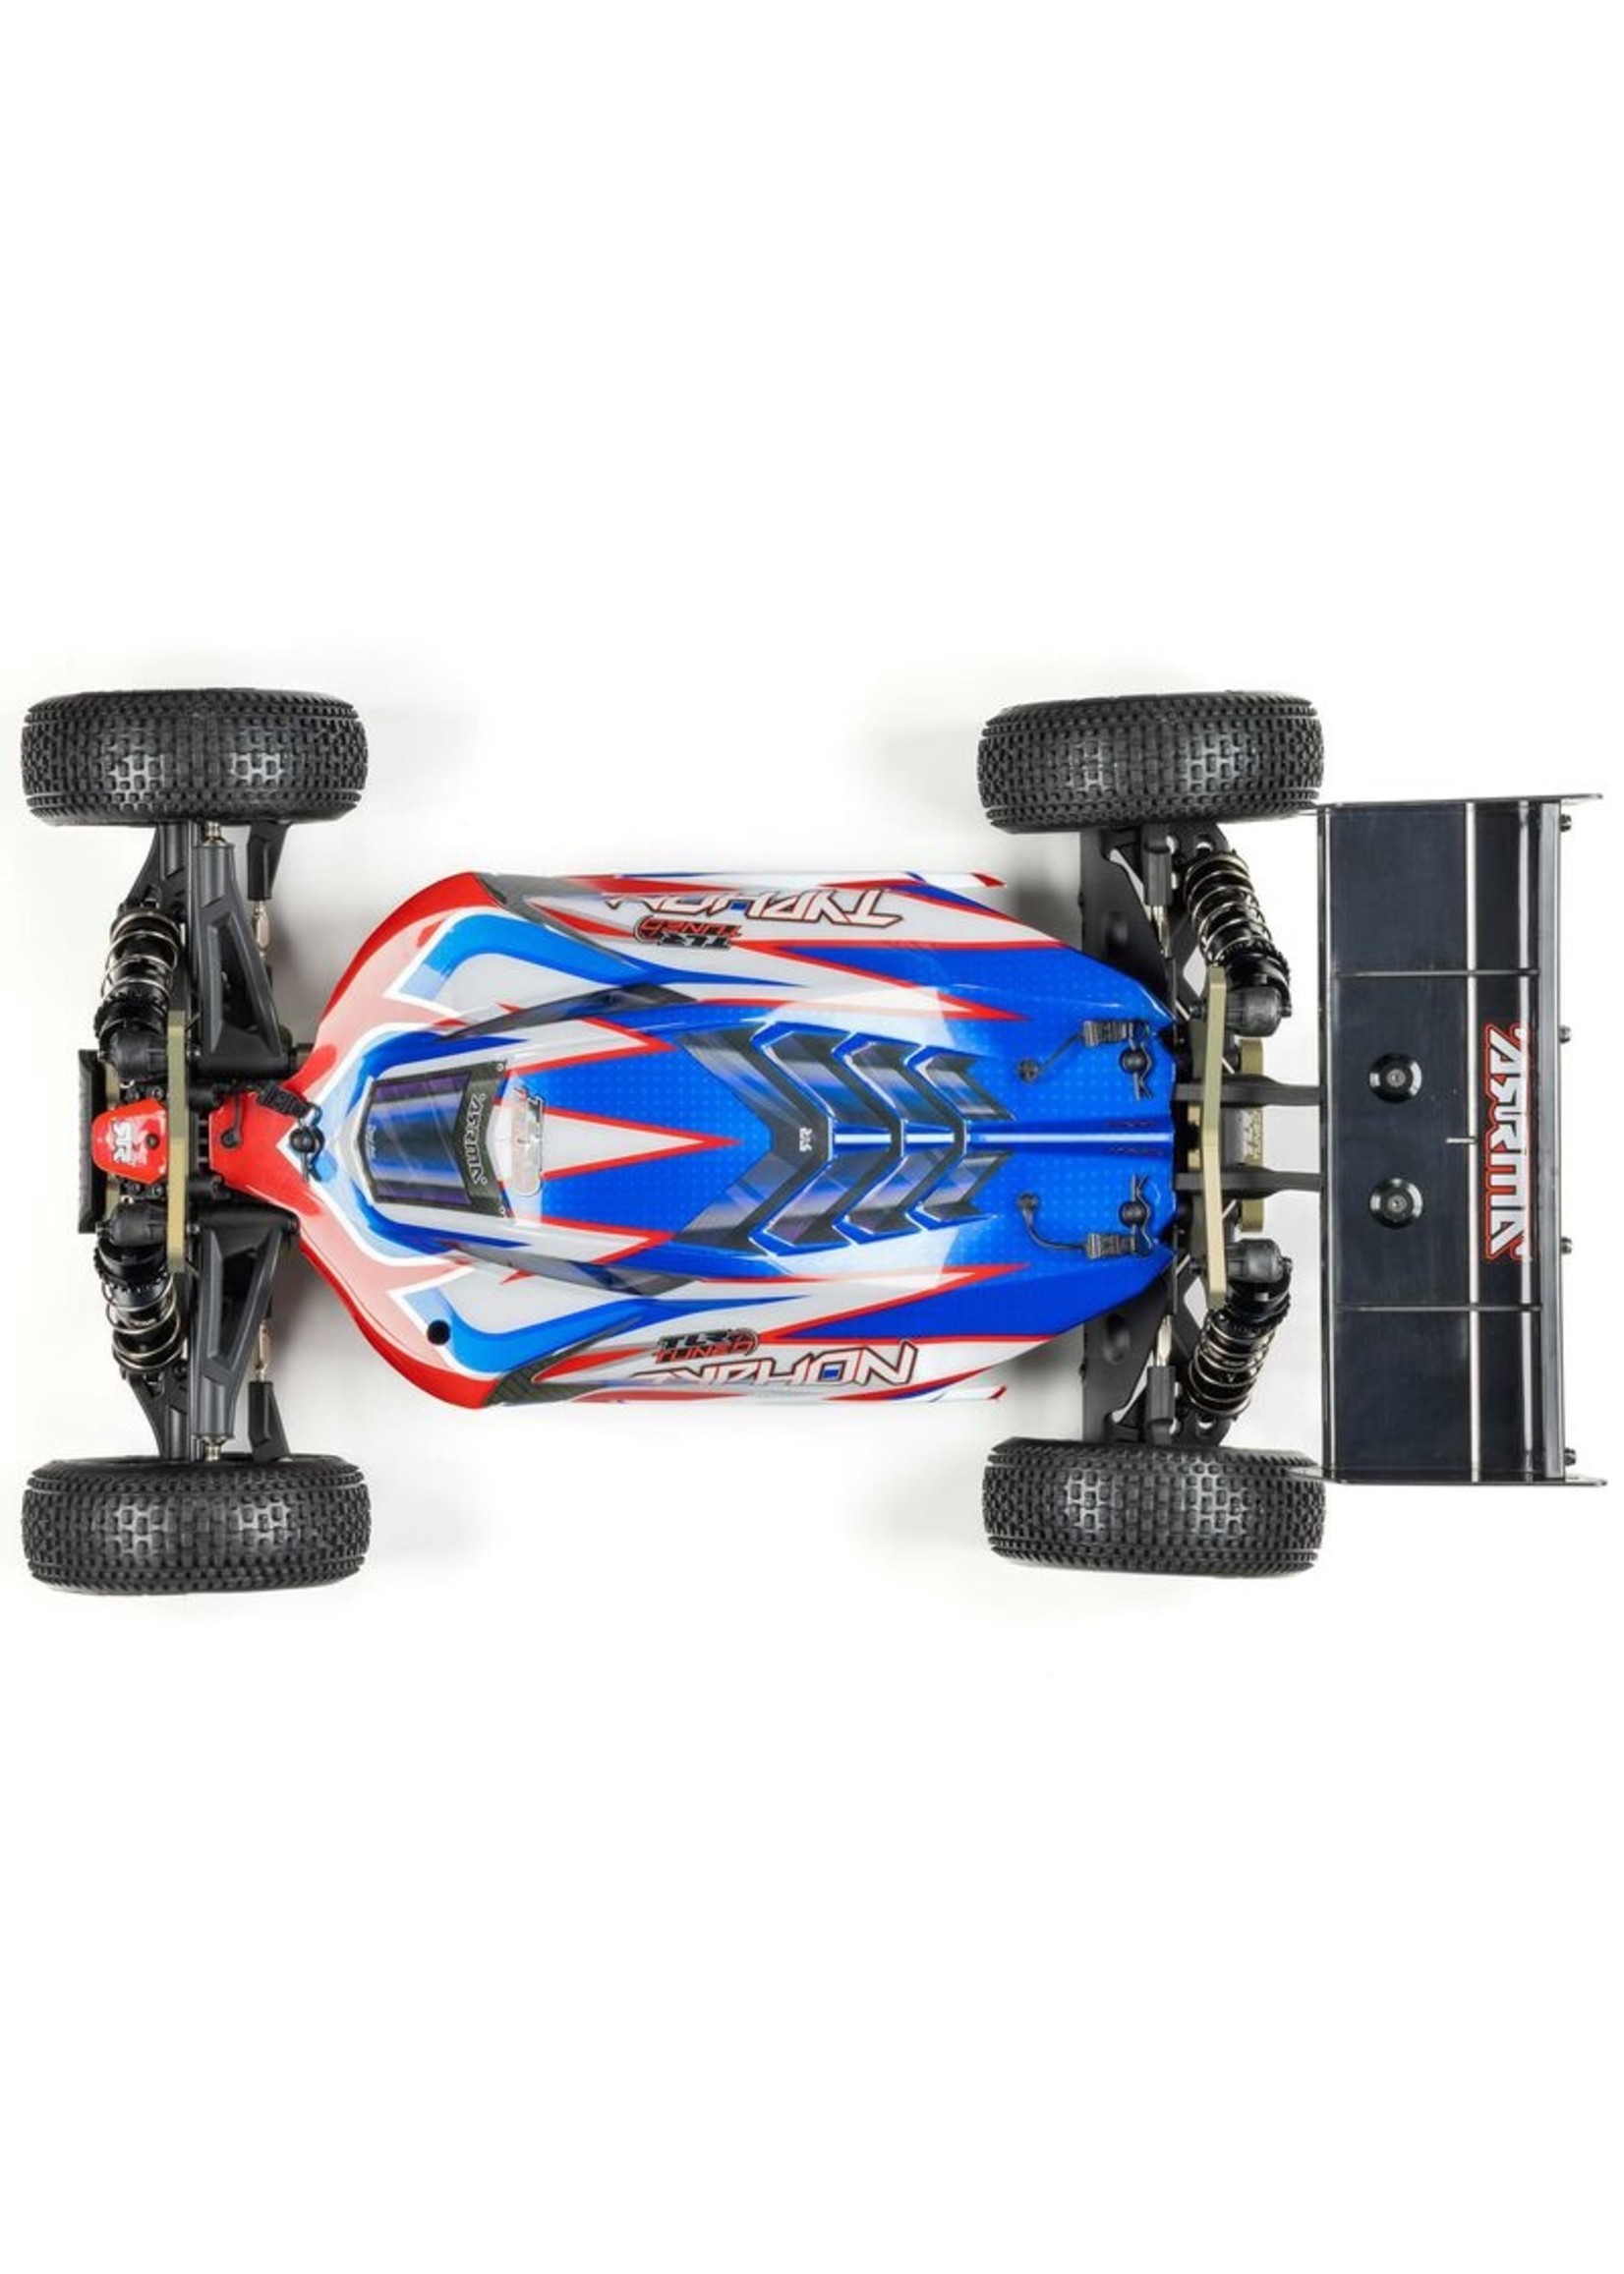 Arrma 1/8 TLR Tuned Typhon 6S 4WD BLX 1: Buggy, RTR - Red/Blue